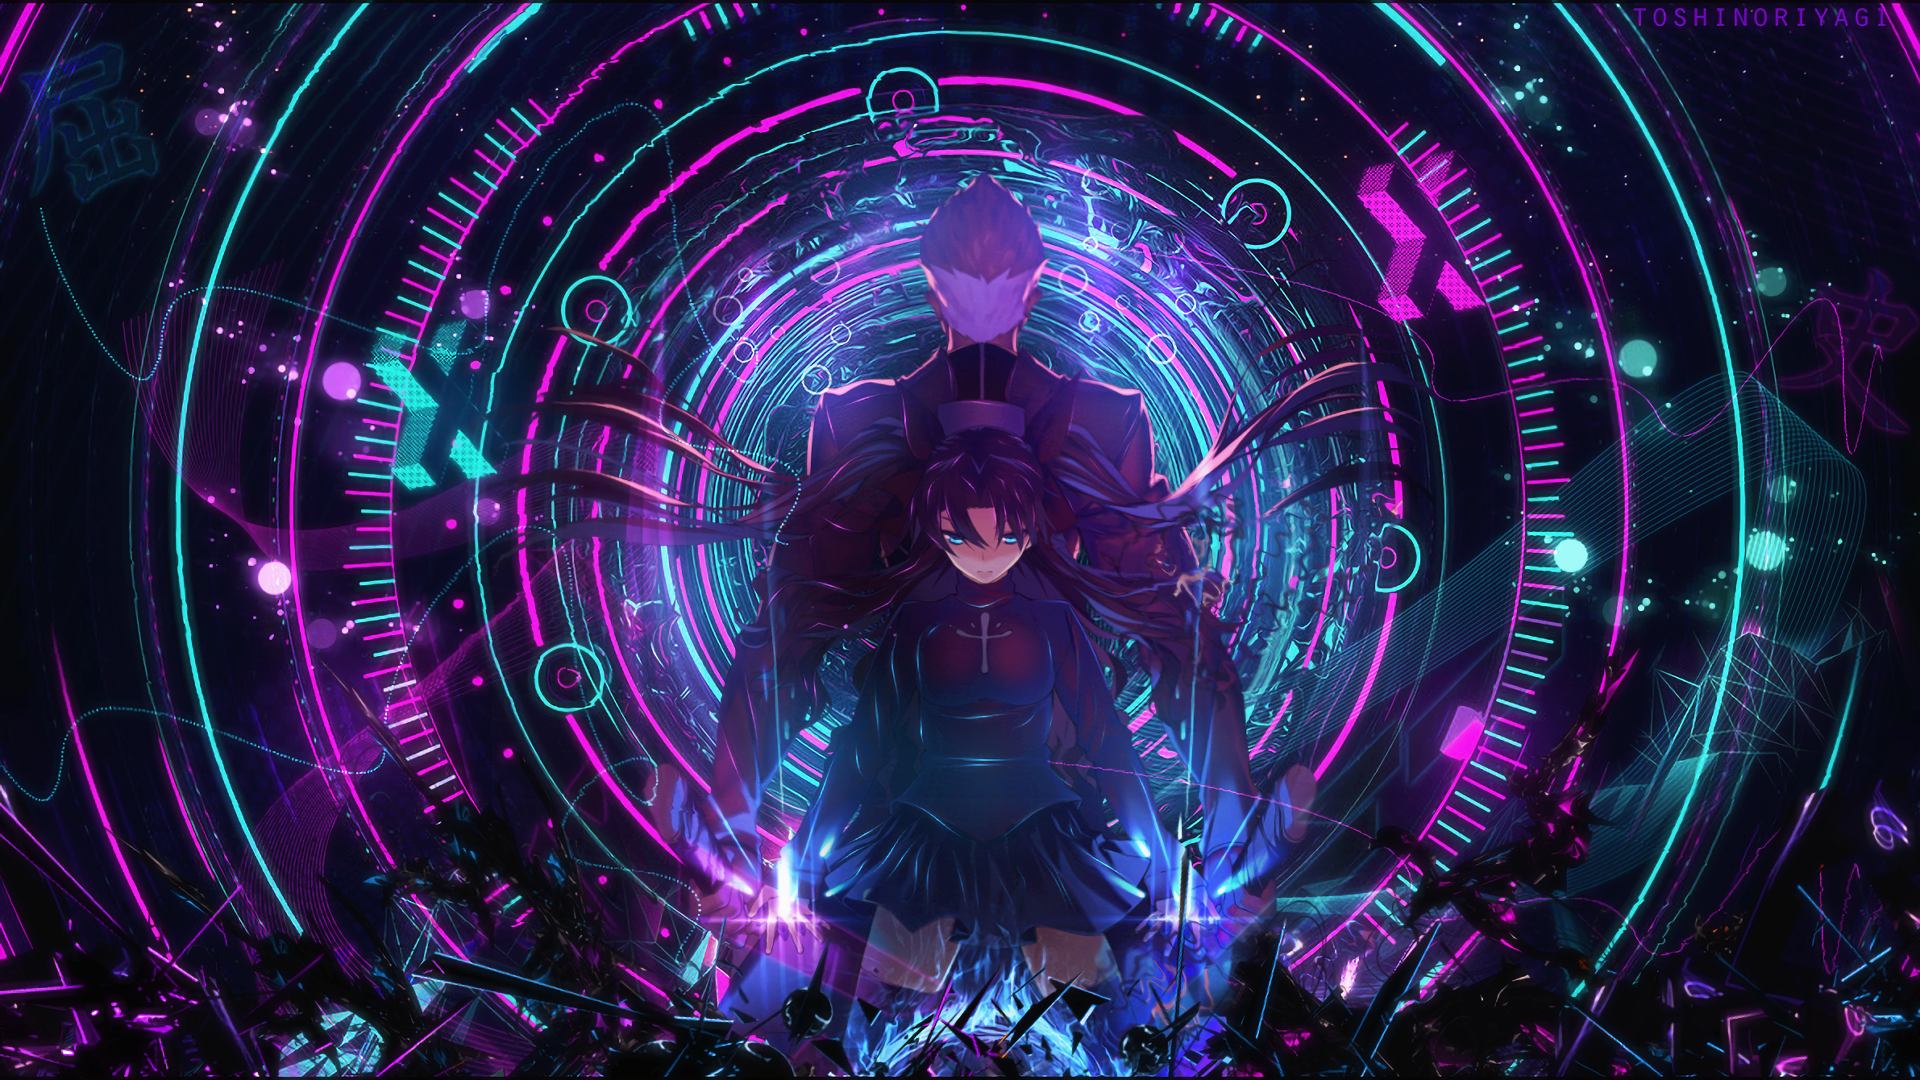 190+ Fate/Stay Night: Unlimited Blade Works HD Wallpapers and Backgrounds